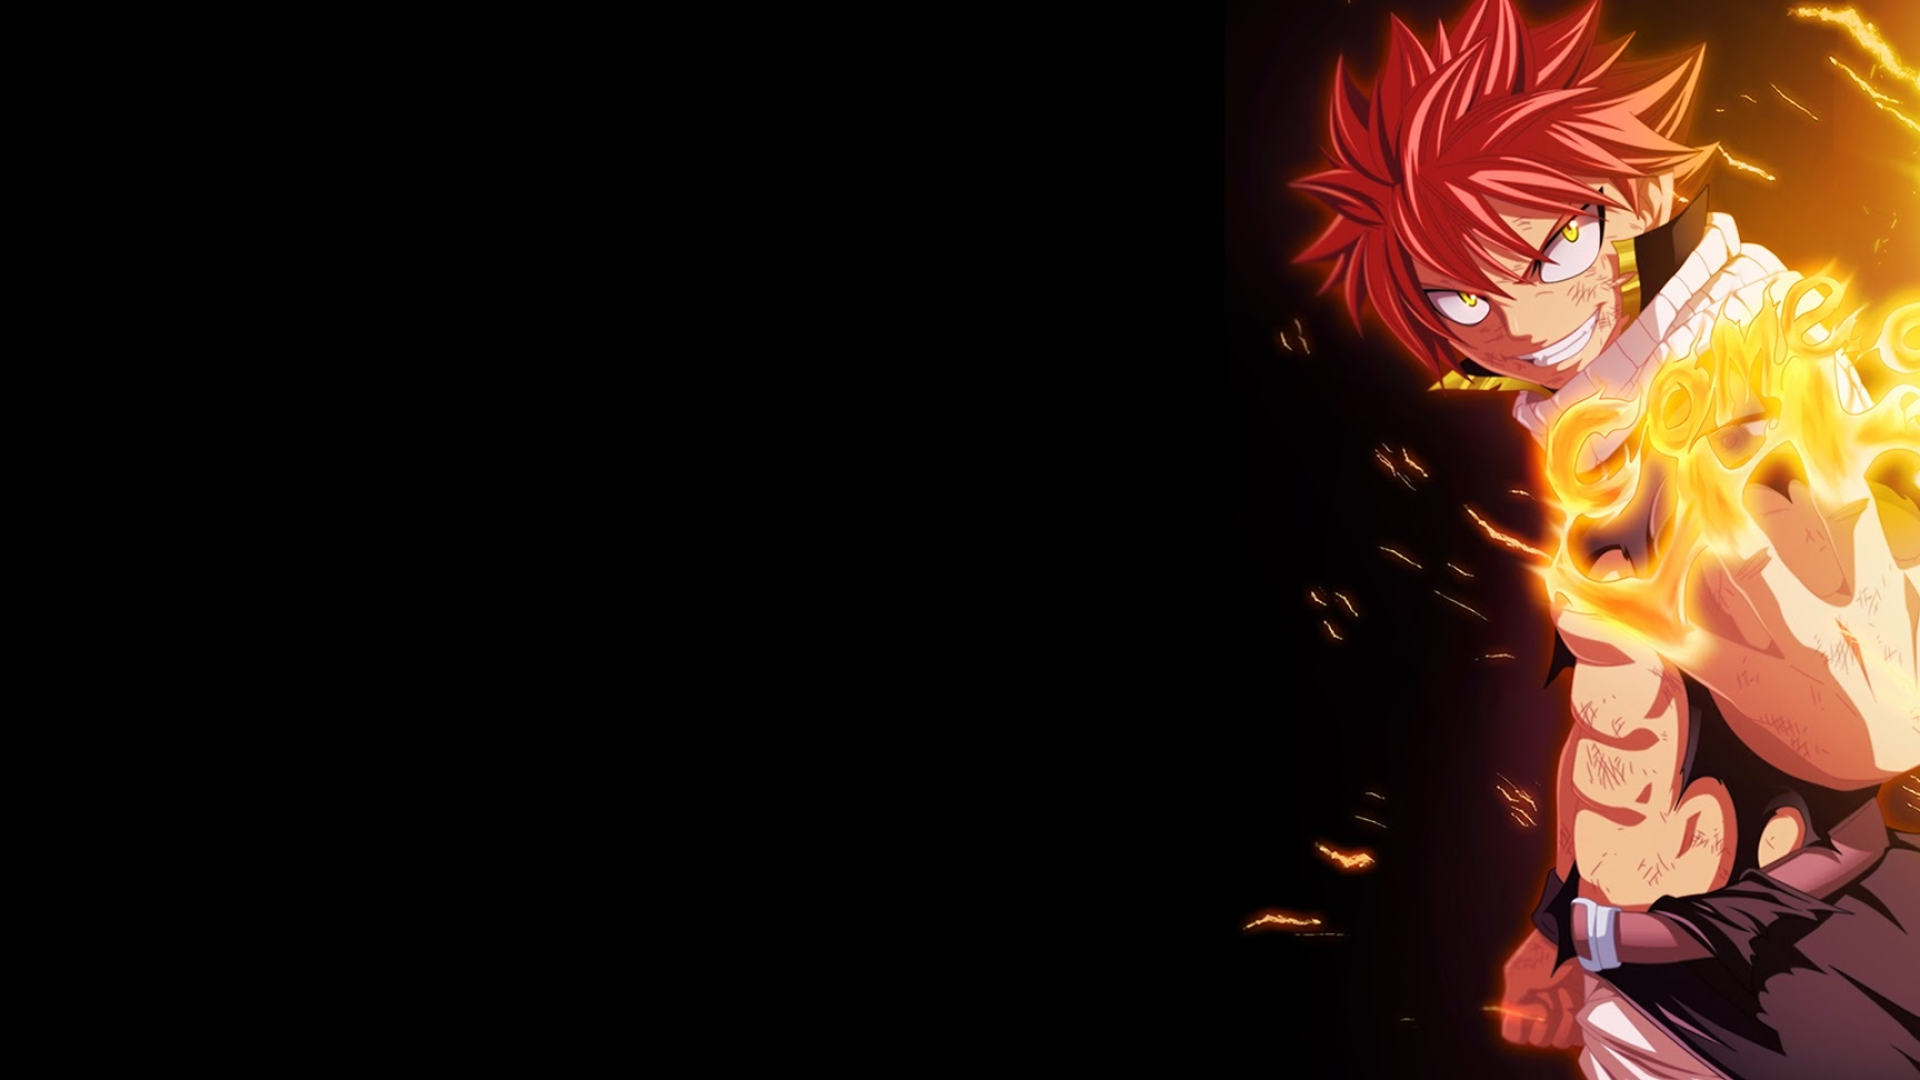 Natsu (Fairy Tail): Natsu's ability to eat flames gives him immunity to most types of flames and allows him to spew fire from his lungs. 1920x1080 Full HD Wallpaper.